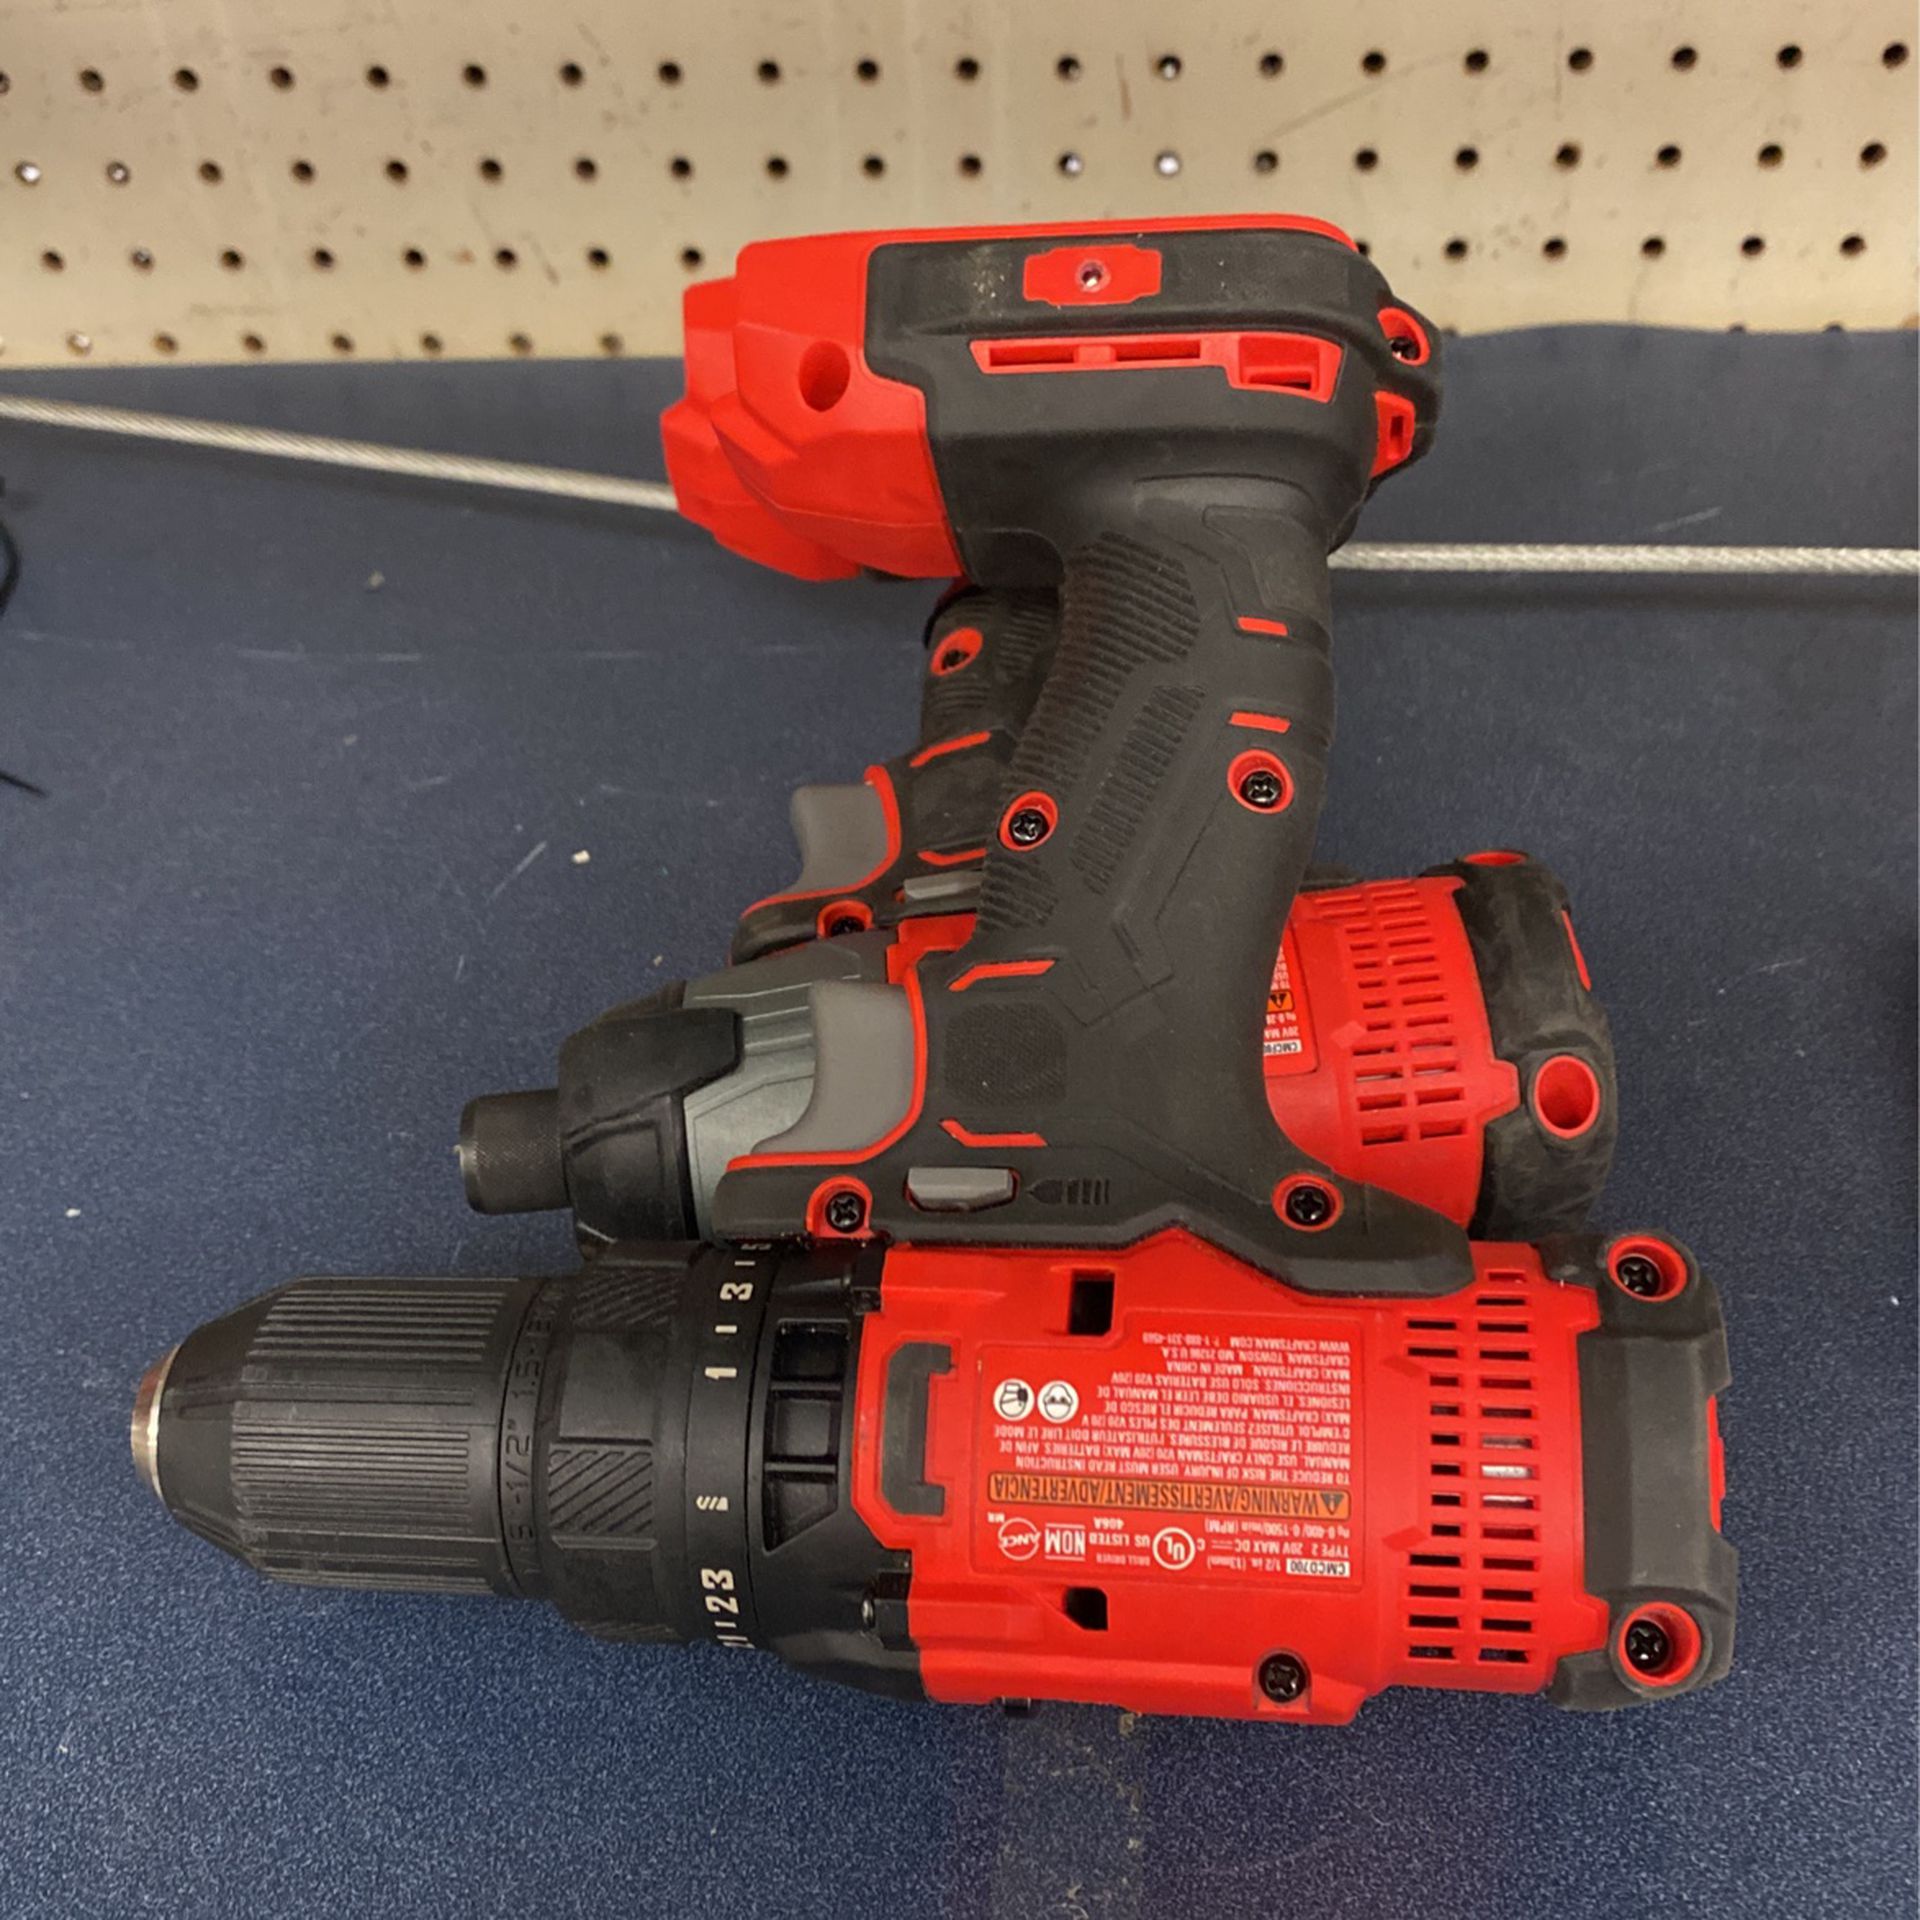 Craftsman Drill And Impact 2 Batteries,charger And Bag